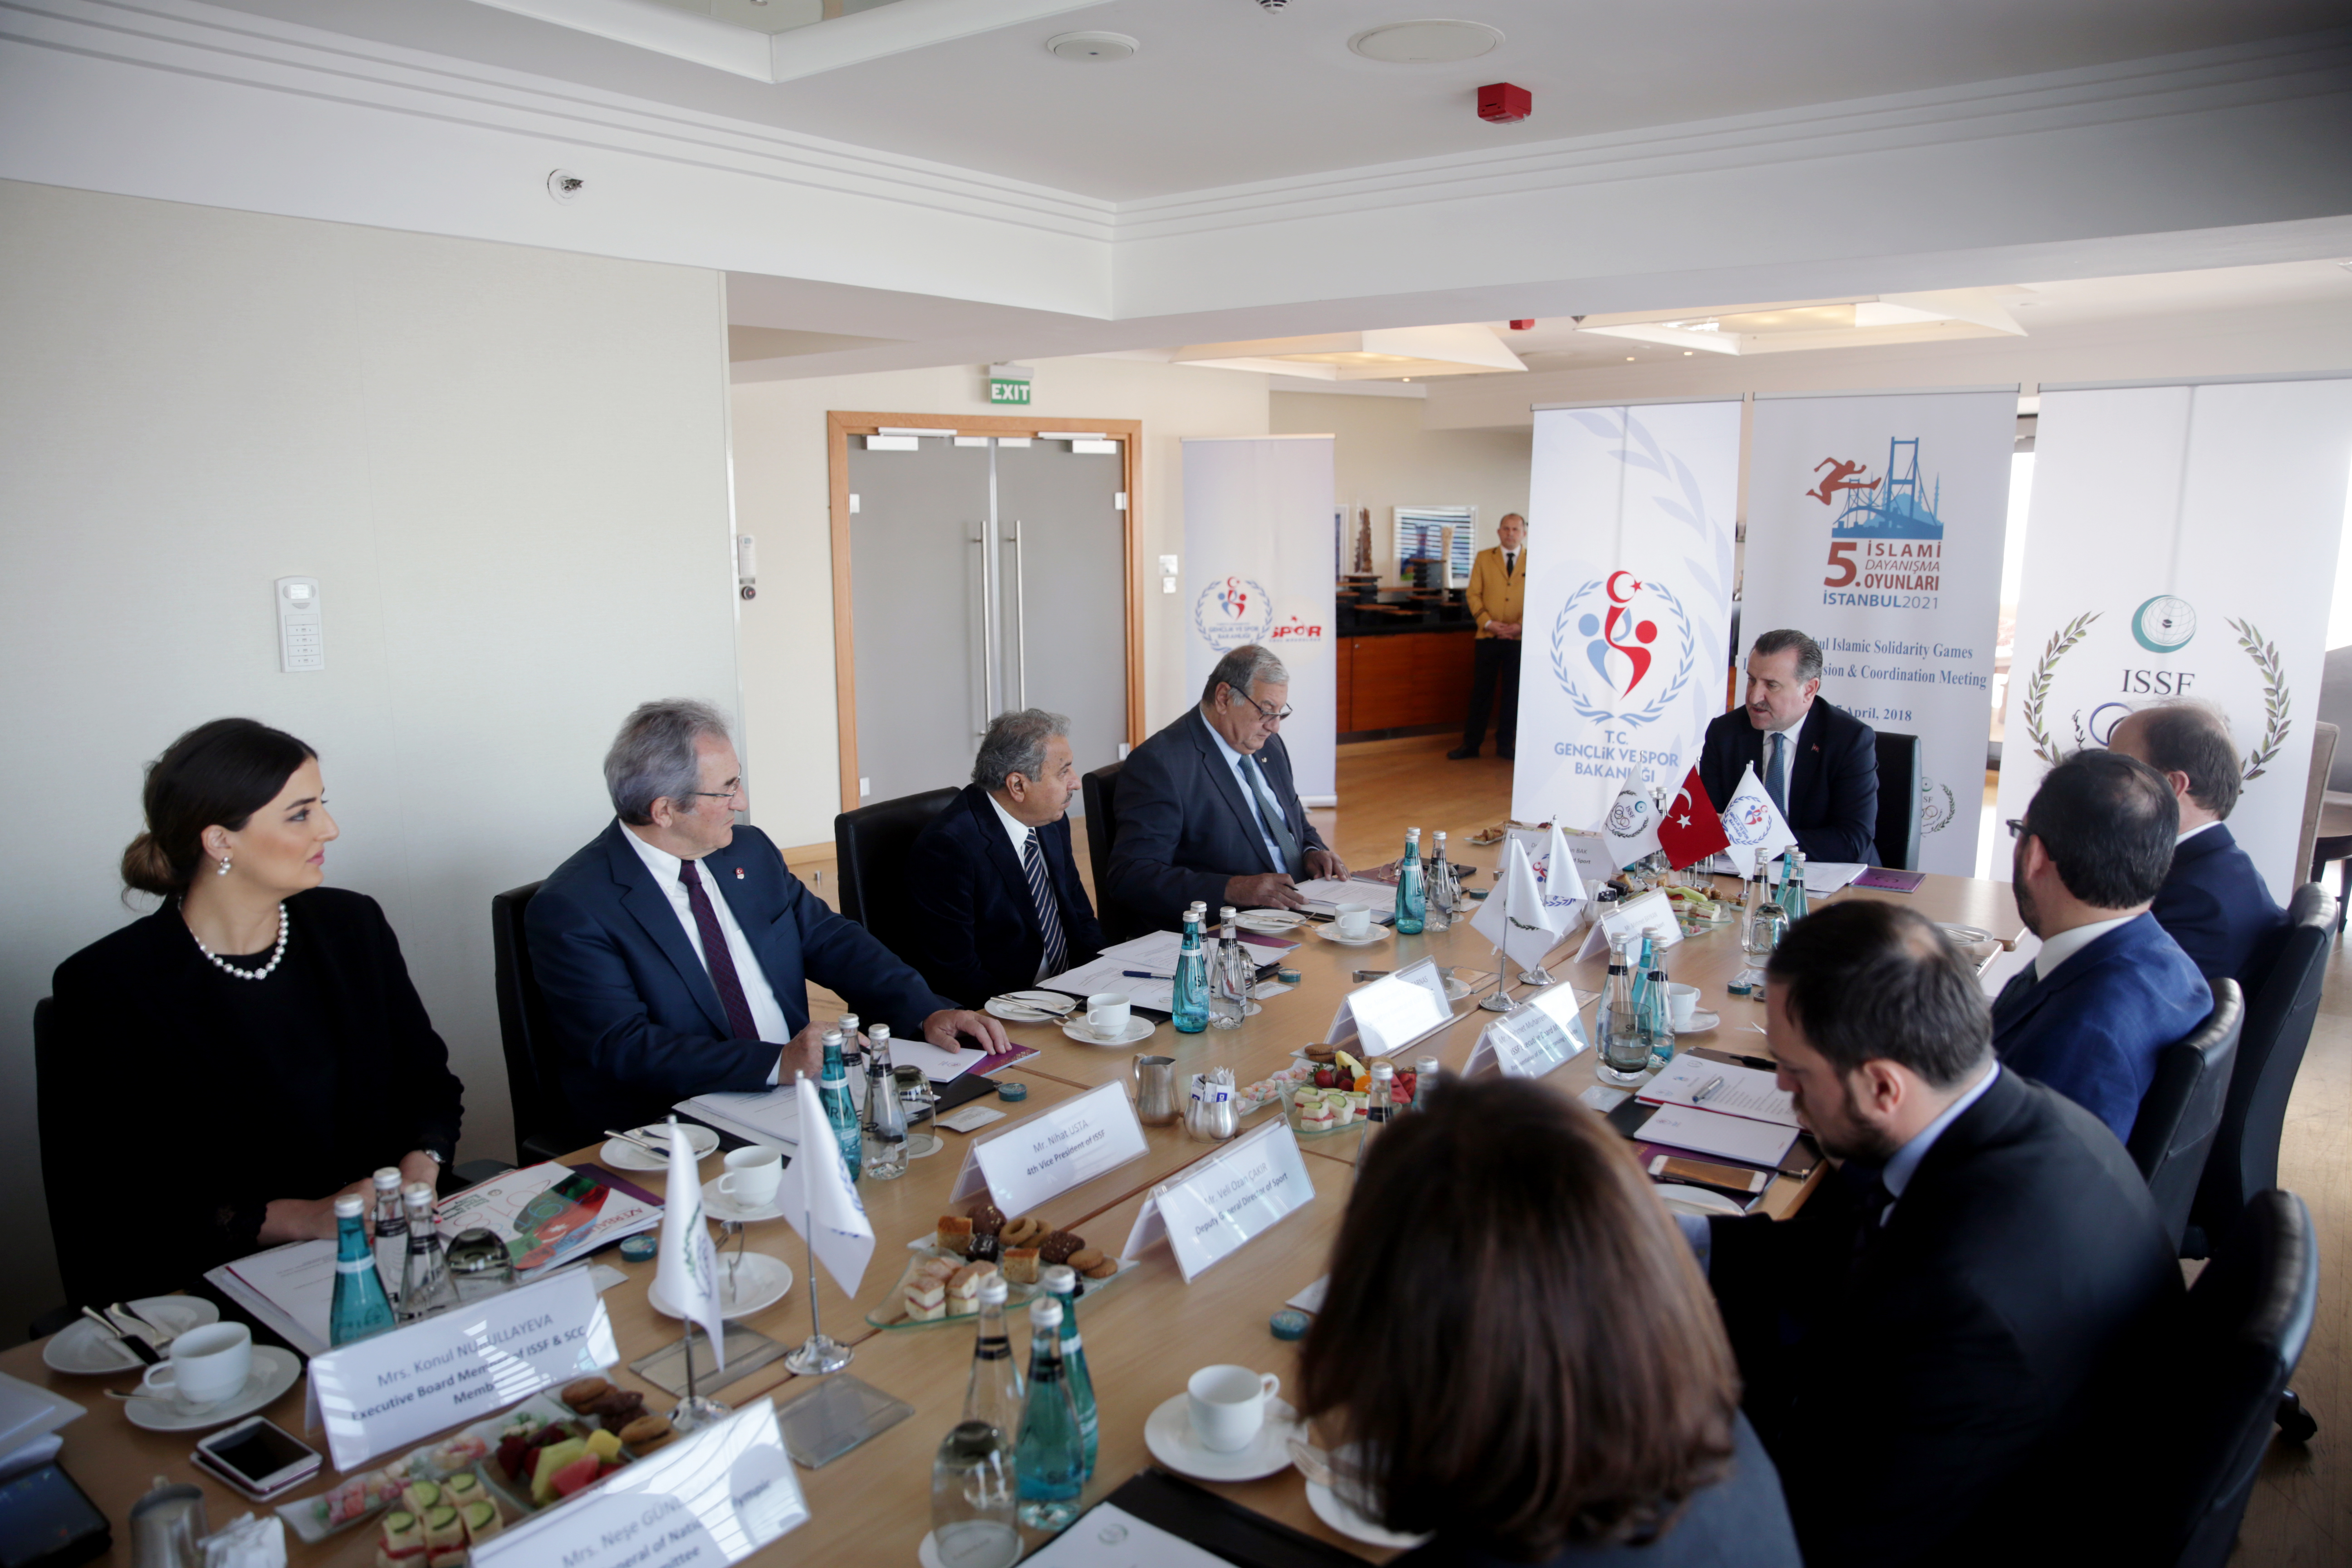  ISSF 1st Coordination Meeting for Istanbul 2021 Islamic Solidarity Games